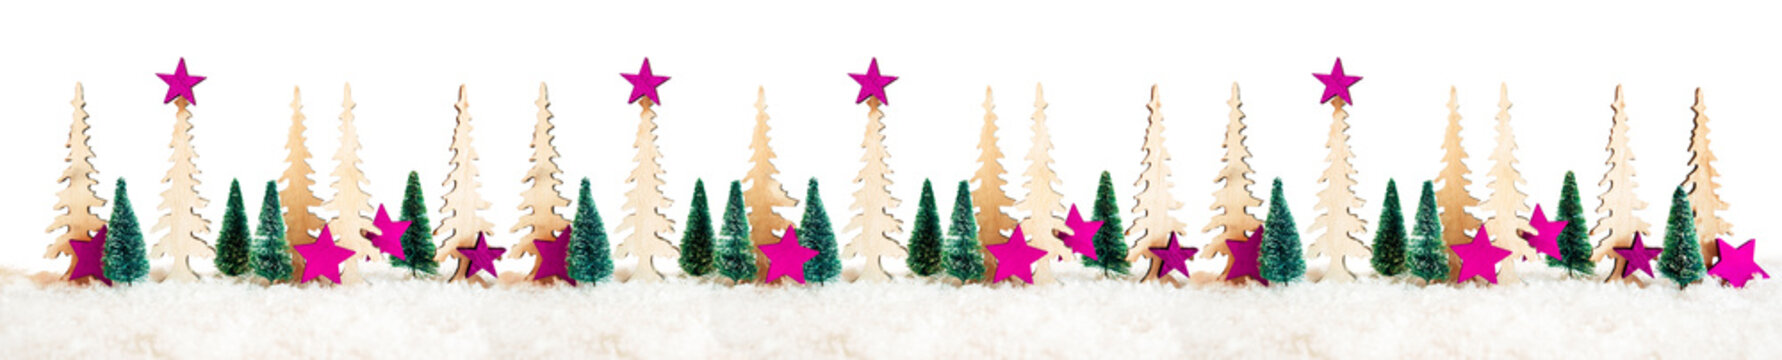 Banner With Many Christmas Tree. Pink Christmas Star Decoration And Ornament. White Isolated Background With Snow